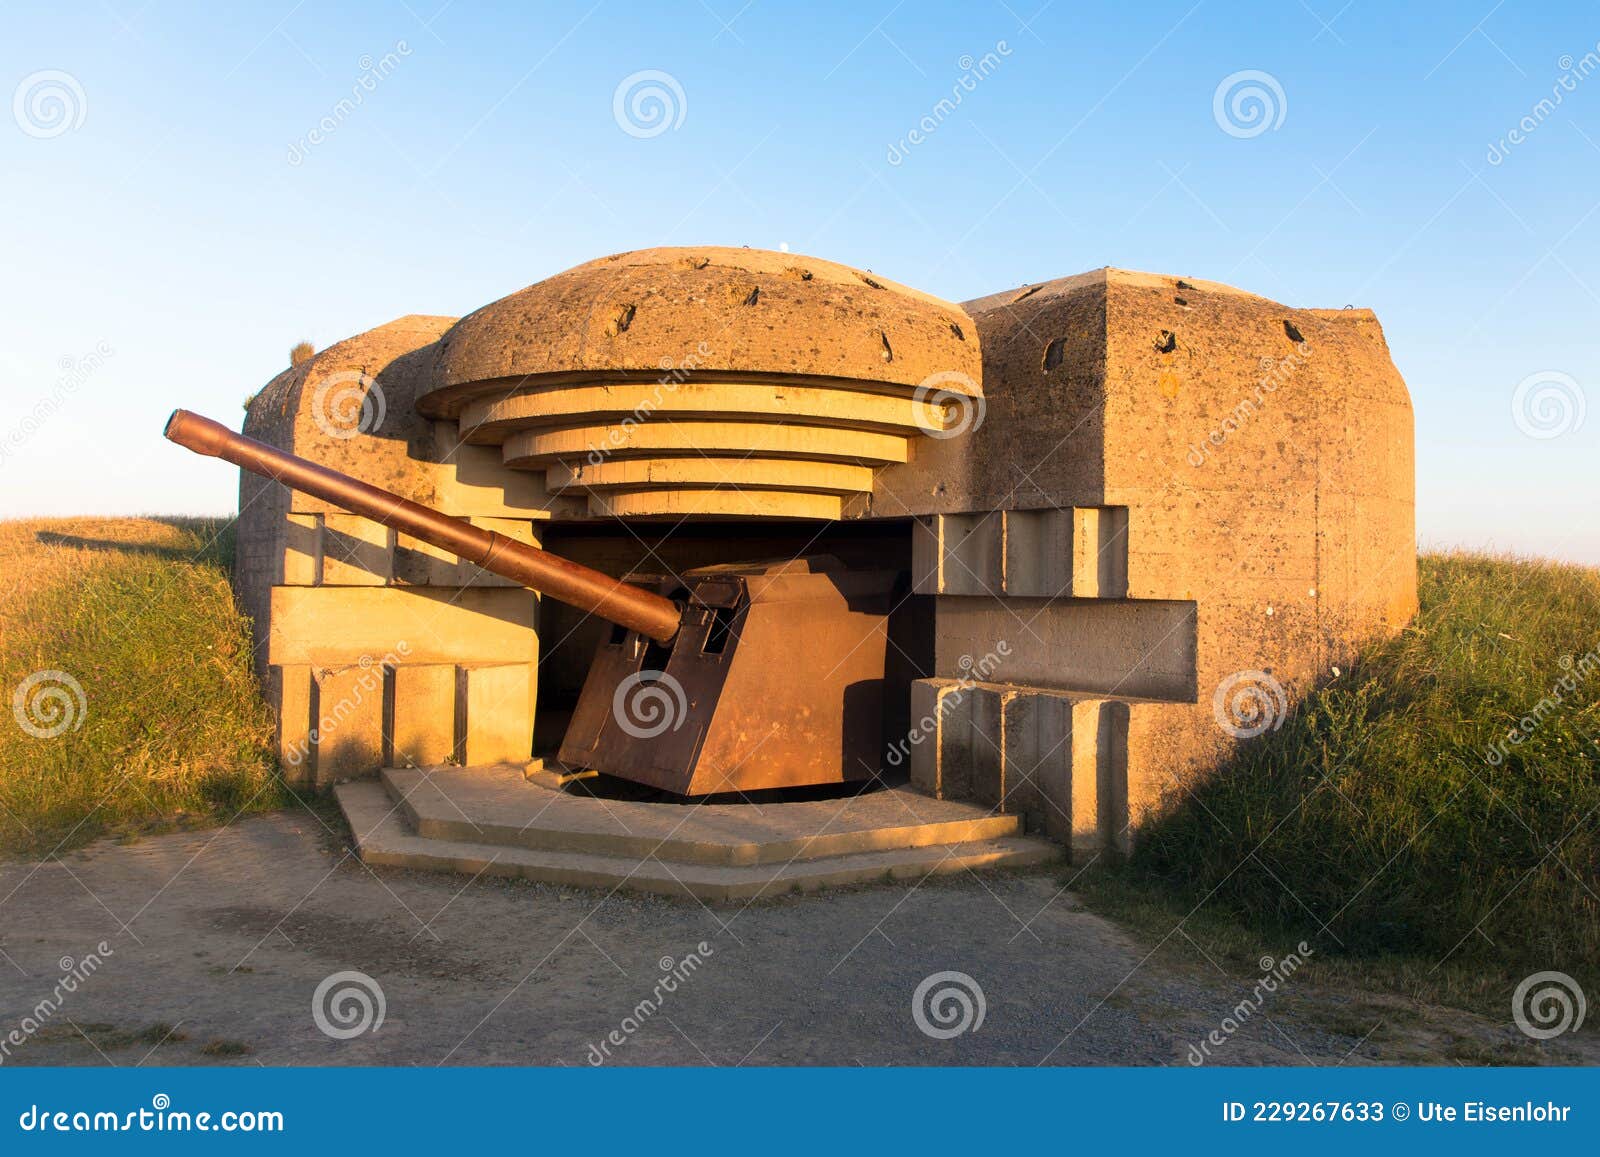 Gun at Omaha Beach. Bomb Shelter with German Long-range Artillery Gun from World 2 in Longues-sur-Mer in Stock - Image of french, arromanches: 229267633